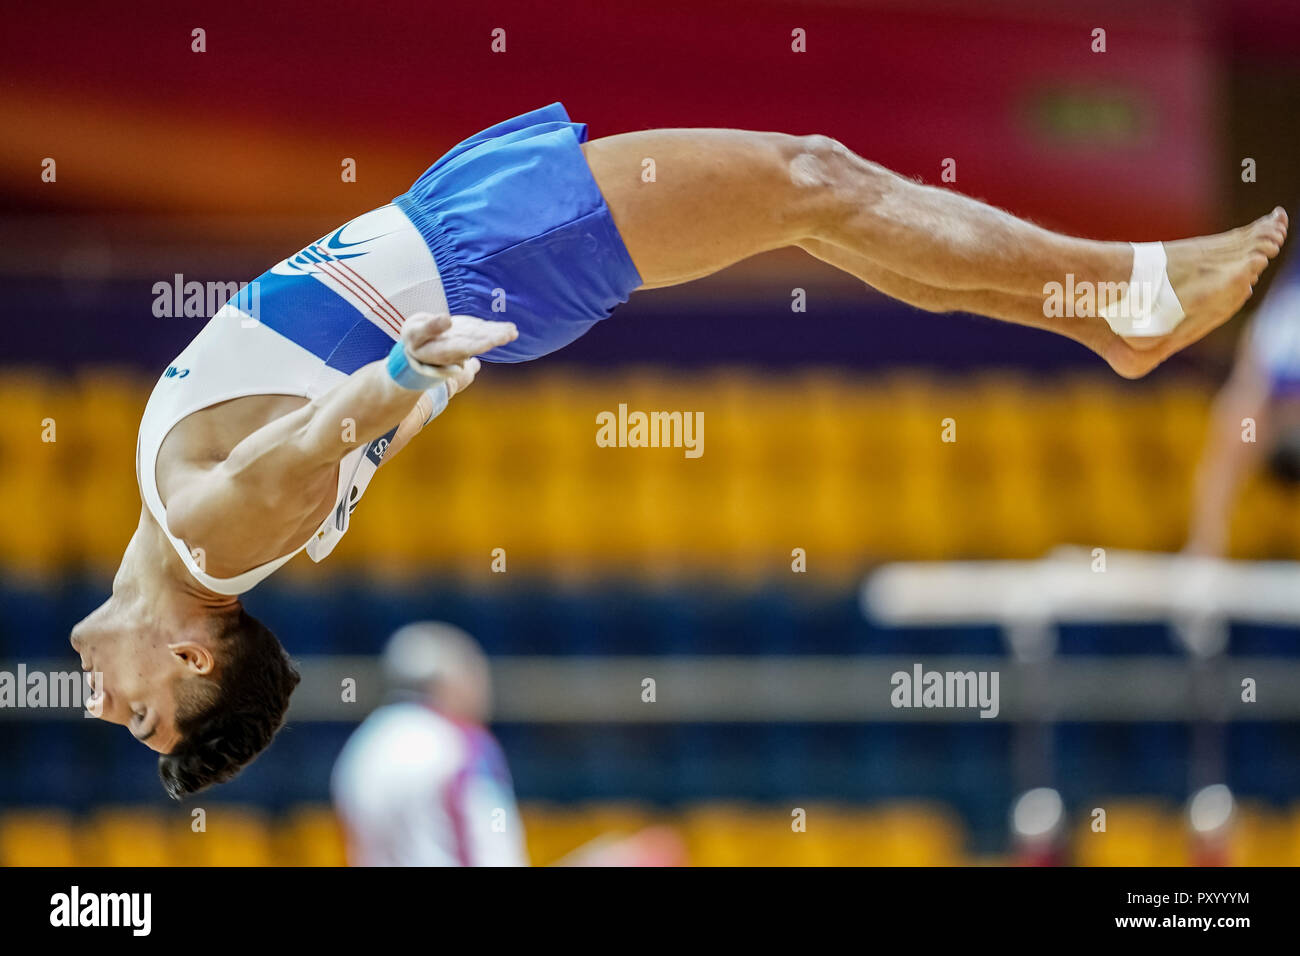 October 25, 2018: Antoine Borello of Â France during floor qualification at the Arena Armeec in Sofia at the 36th FIG Rhythmic Gymnastics World Championships. Ulrik Pedersen/CSM Stock Photo